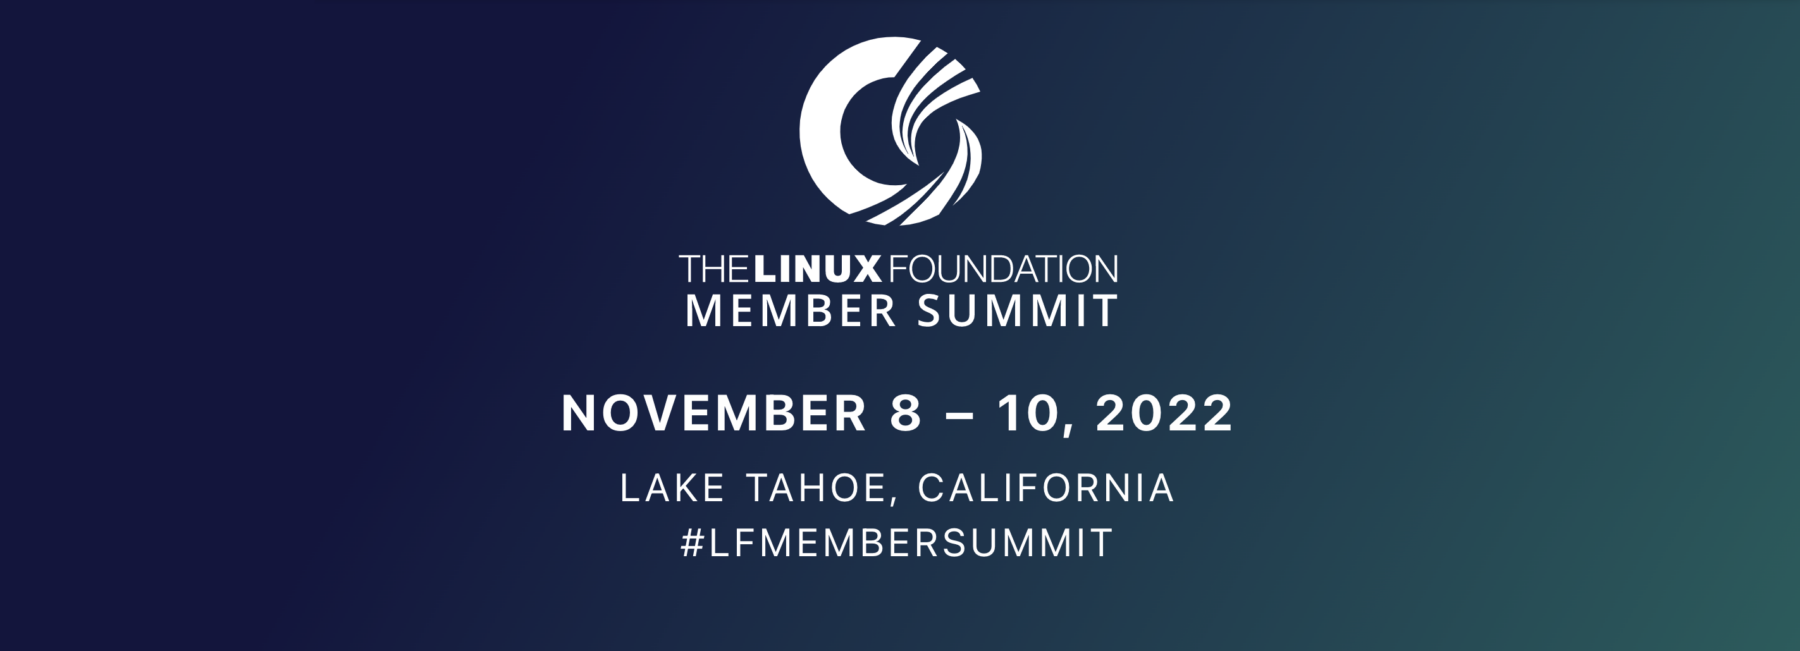 The Linux Foundation Member Summit 2022